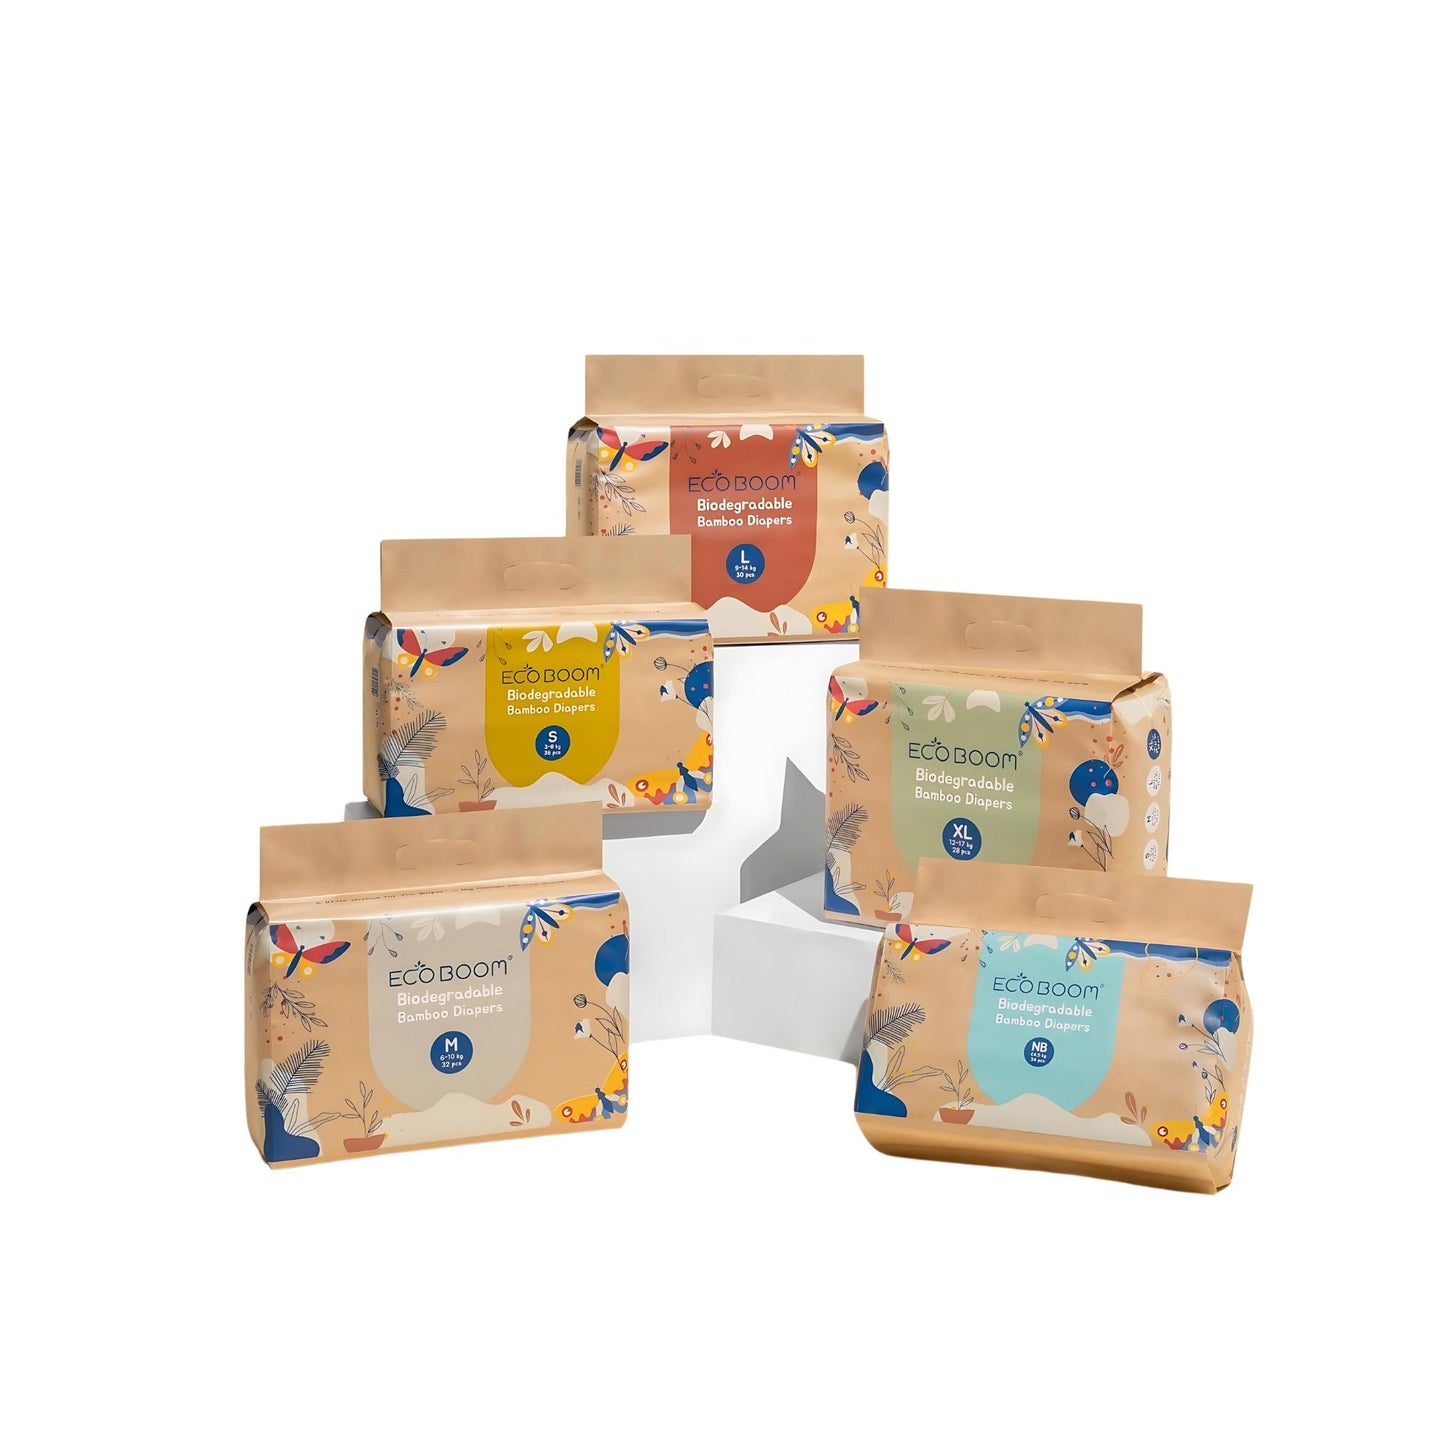 Eco Boom Biodegradable Bamboo Tape Trial Pack Diapers